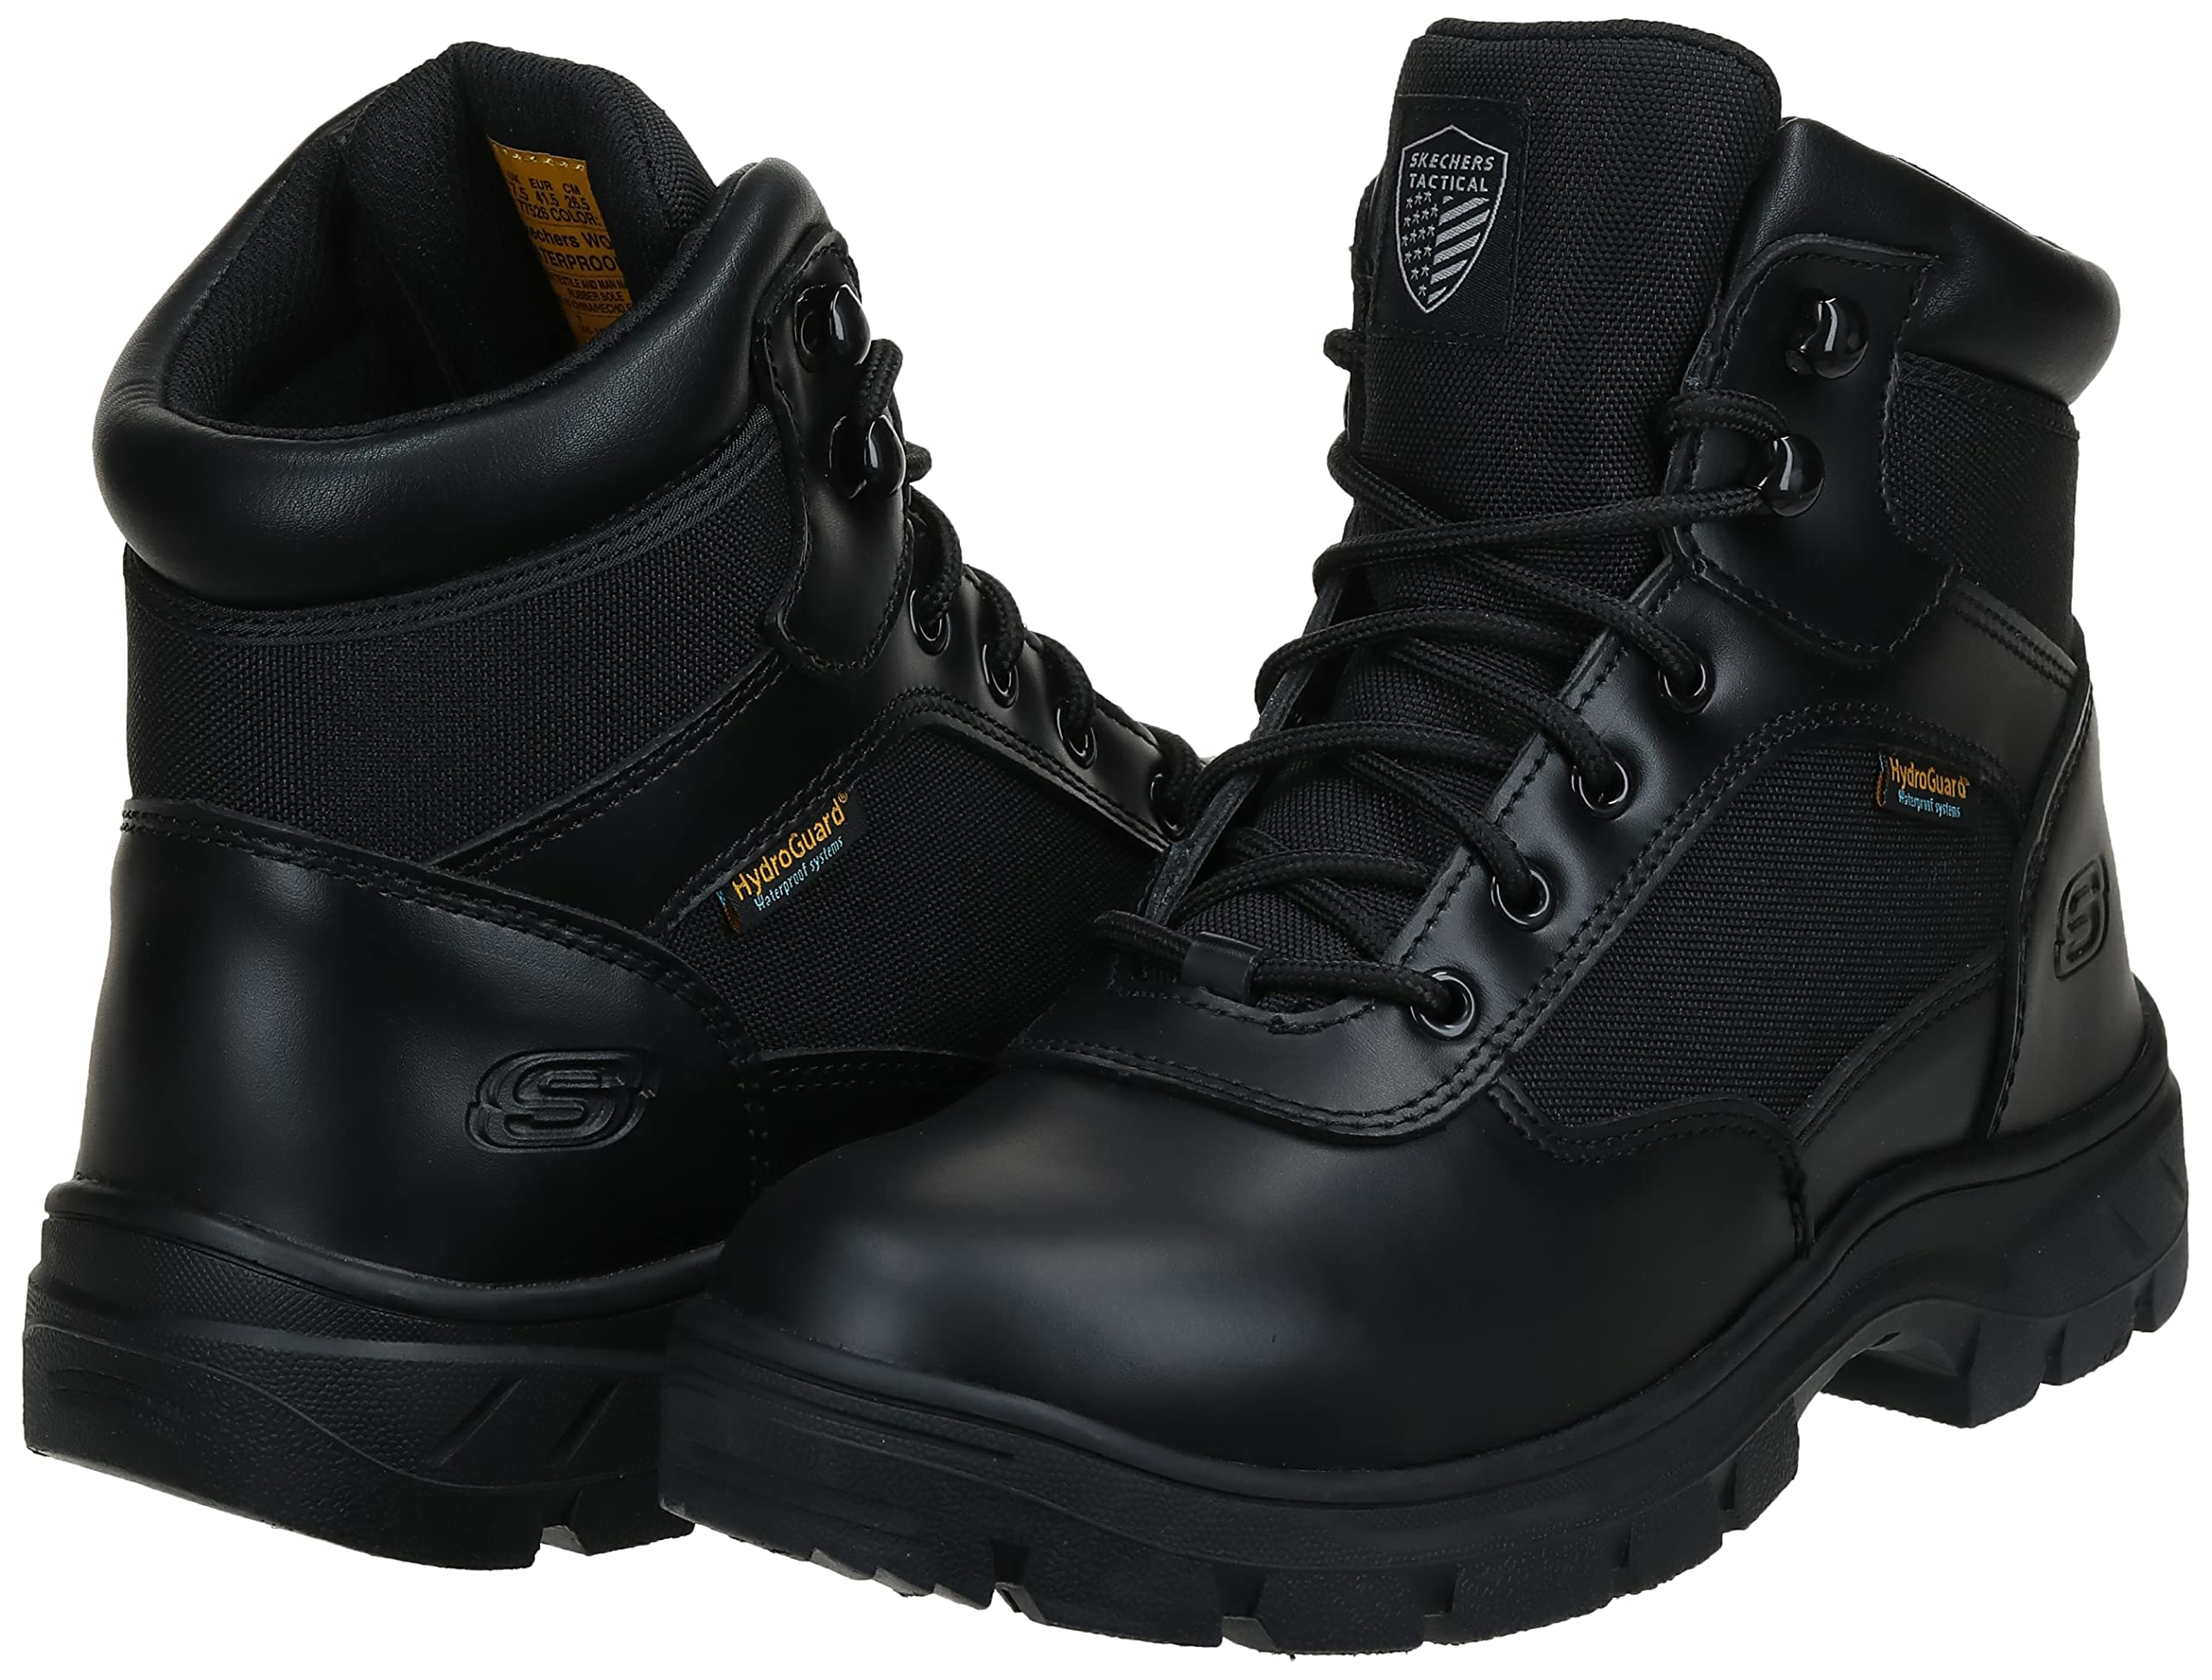 Skechers Men's New Wascana-Benen Military and Tactical Boot